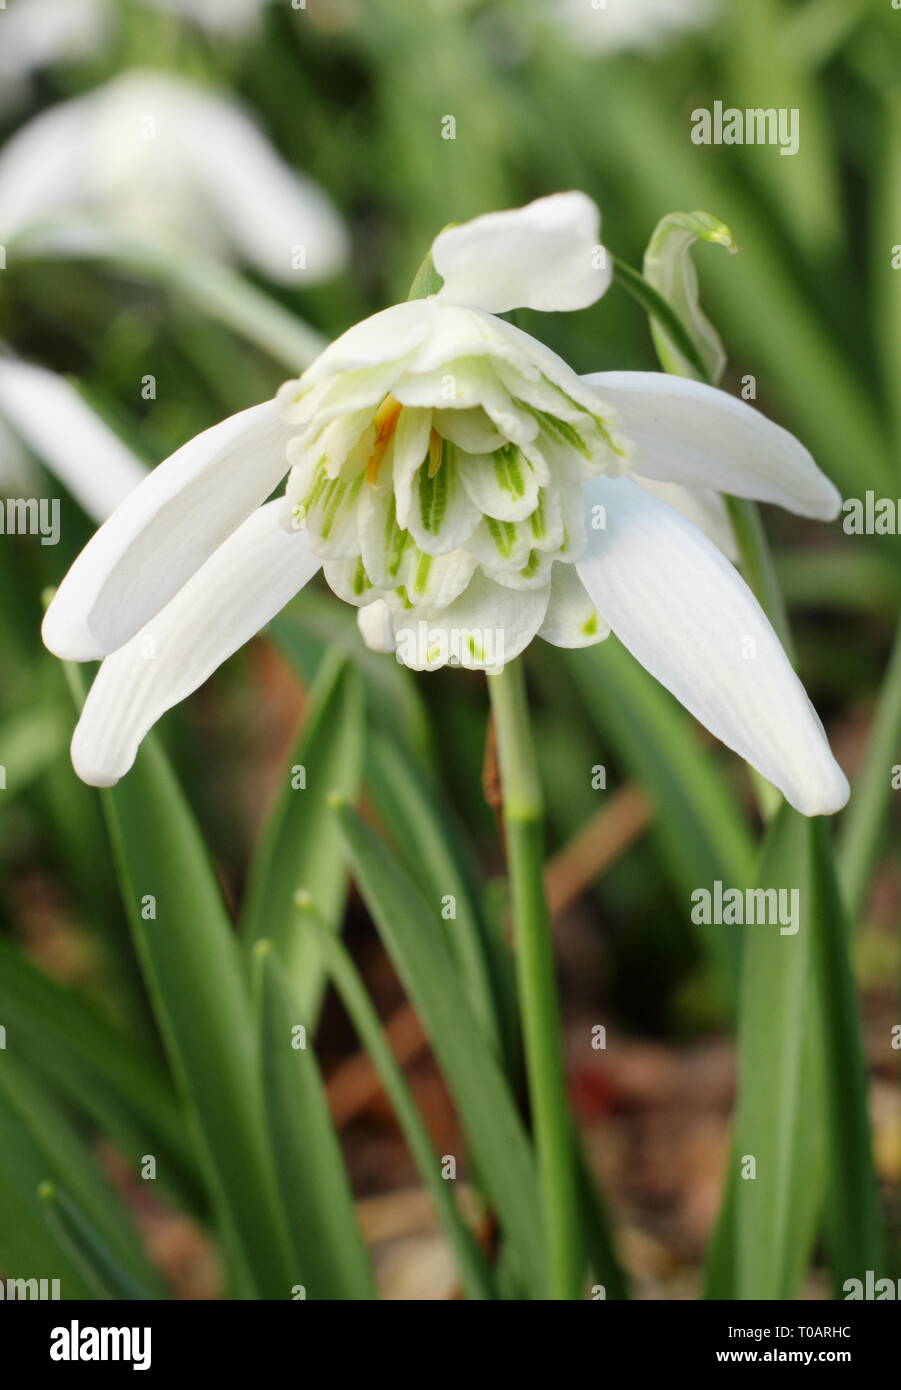 Galanthus 'Lady Beatrix Stanley'. Double blooms of snowdrop 'Lady Beatrix Stanley' showing characteristic green dots on outer petals - February, UK Stock Photo